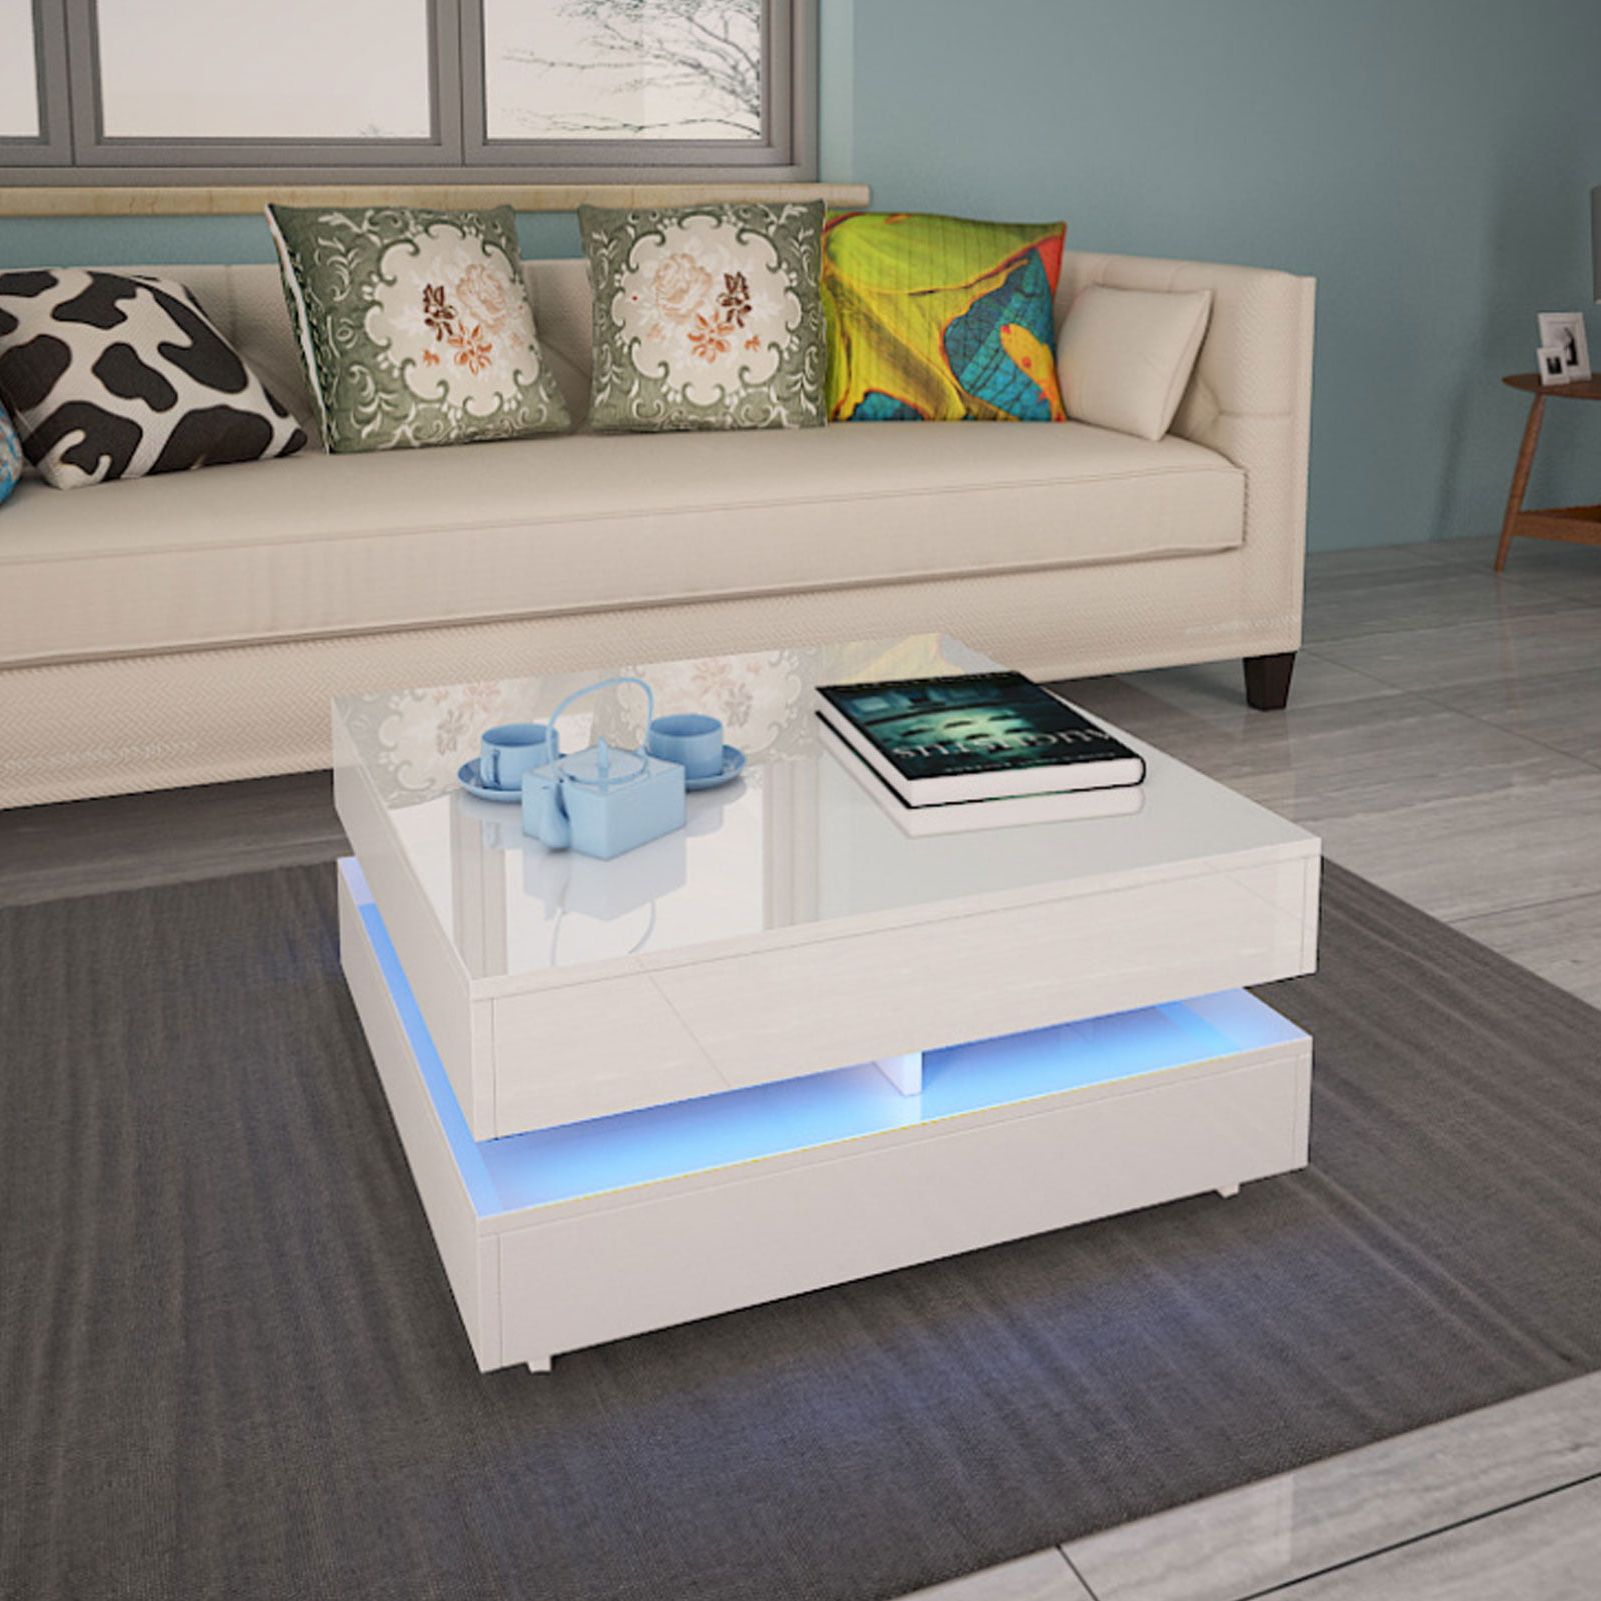 2019 Modern Modern Glossy White Coffee Table W/ Led Lighting, 2 Tier Within Coffee Tables With Drawers And Led Lights (View 5 of 15)